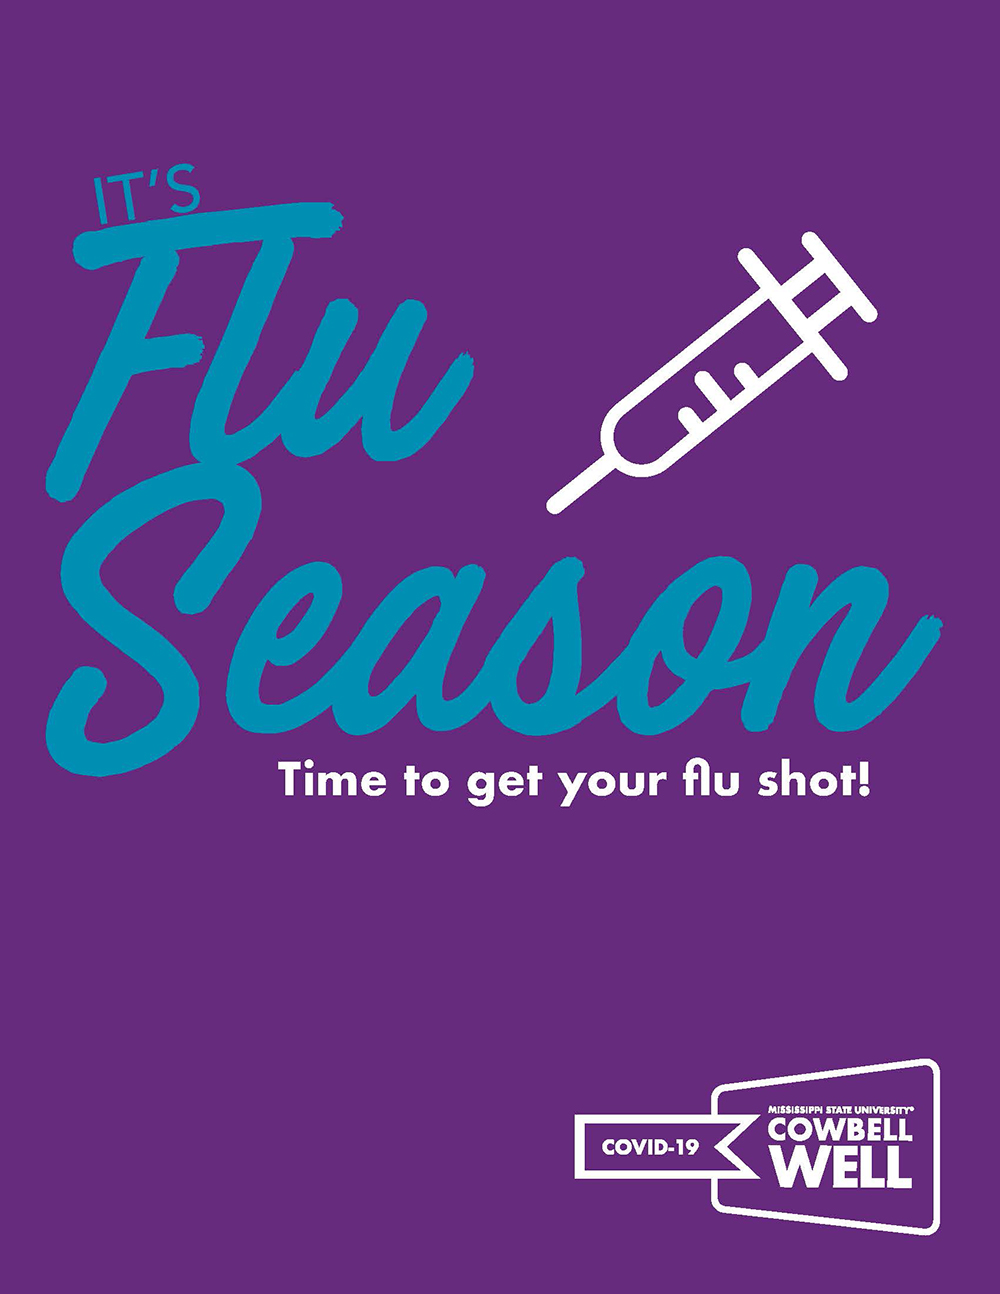 Purple graphic and blue lettering with a message reminding MSU students, faculty and staff of flu season and the availability of flu shots